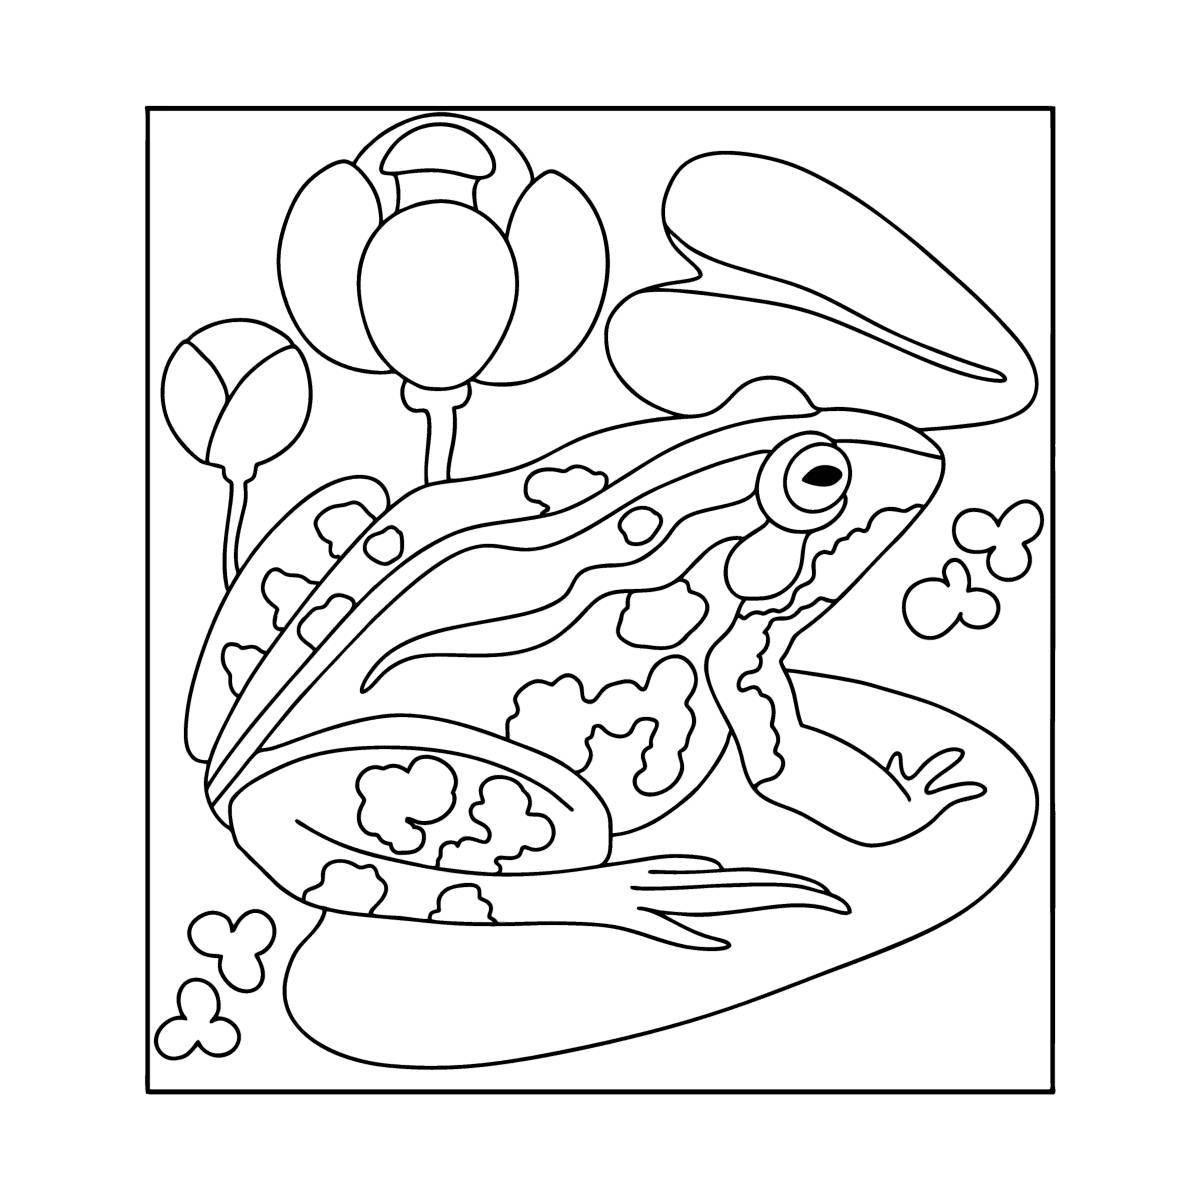 Adorable fly agaric frog coloring page